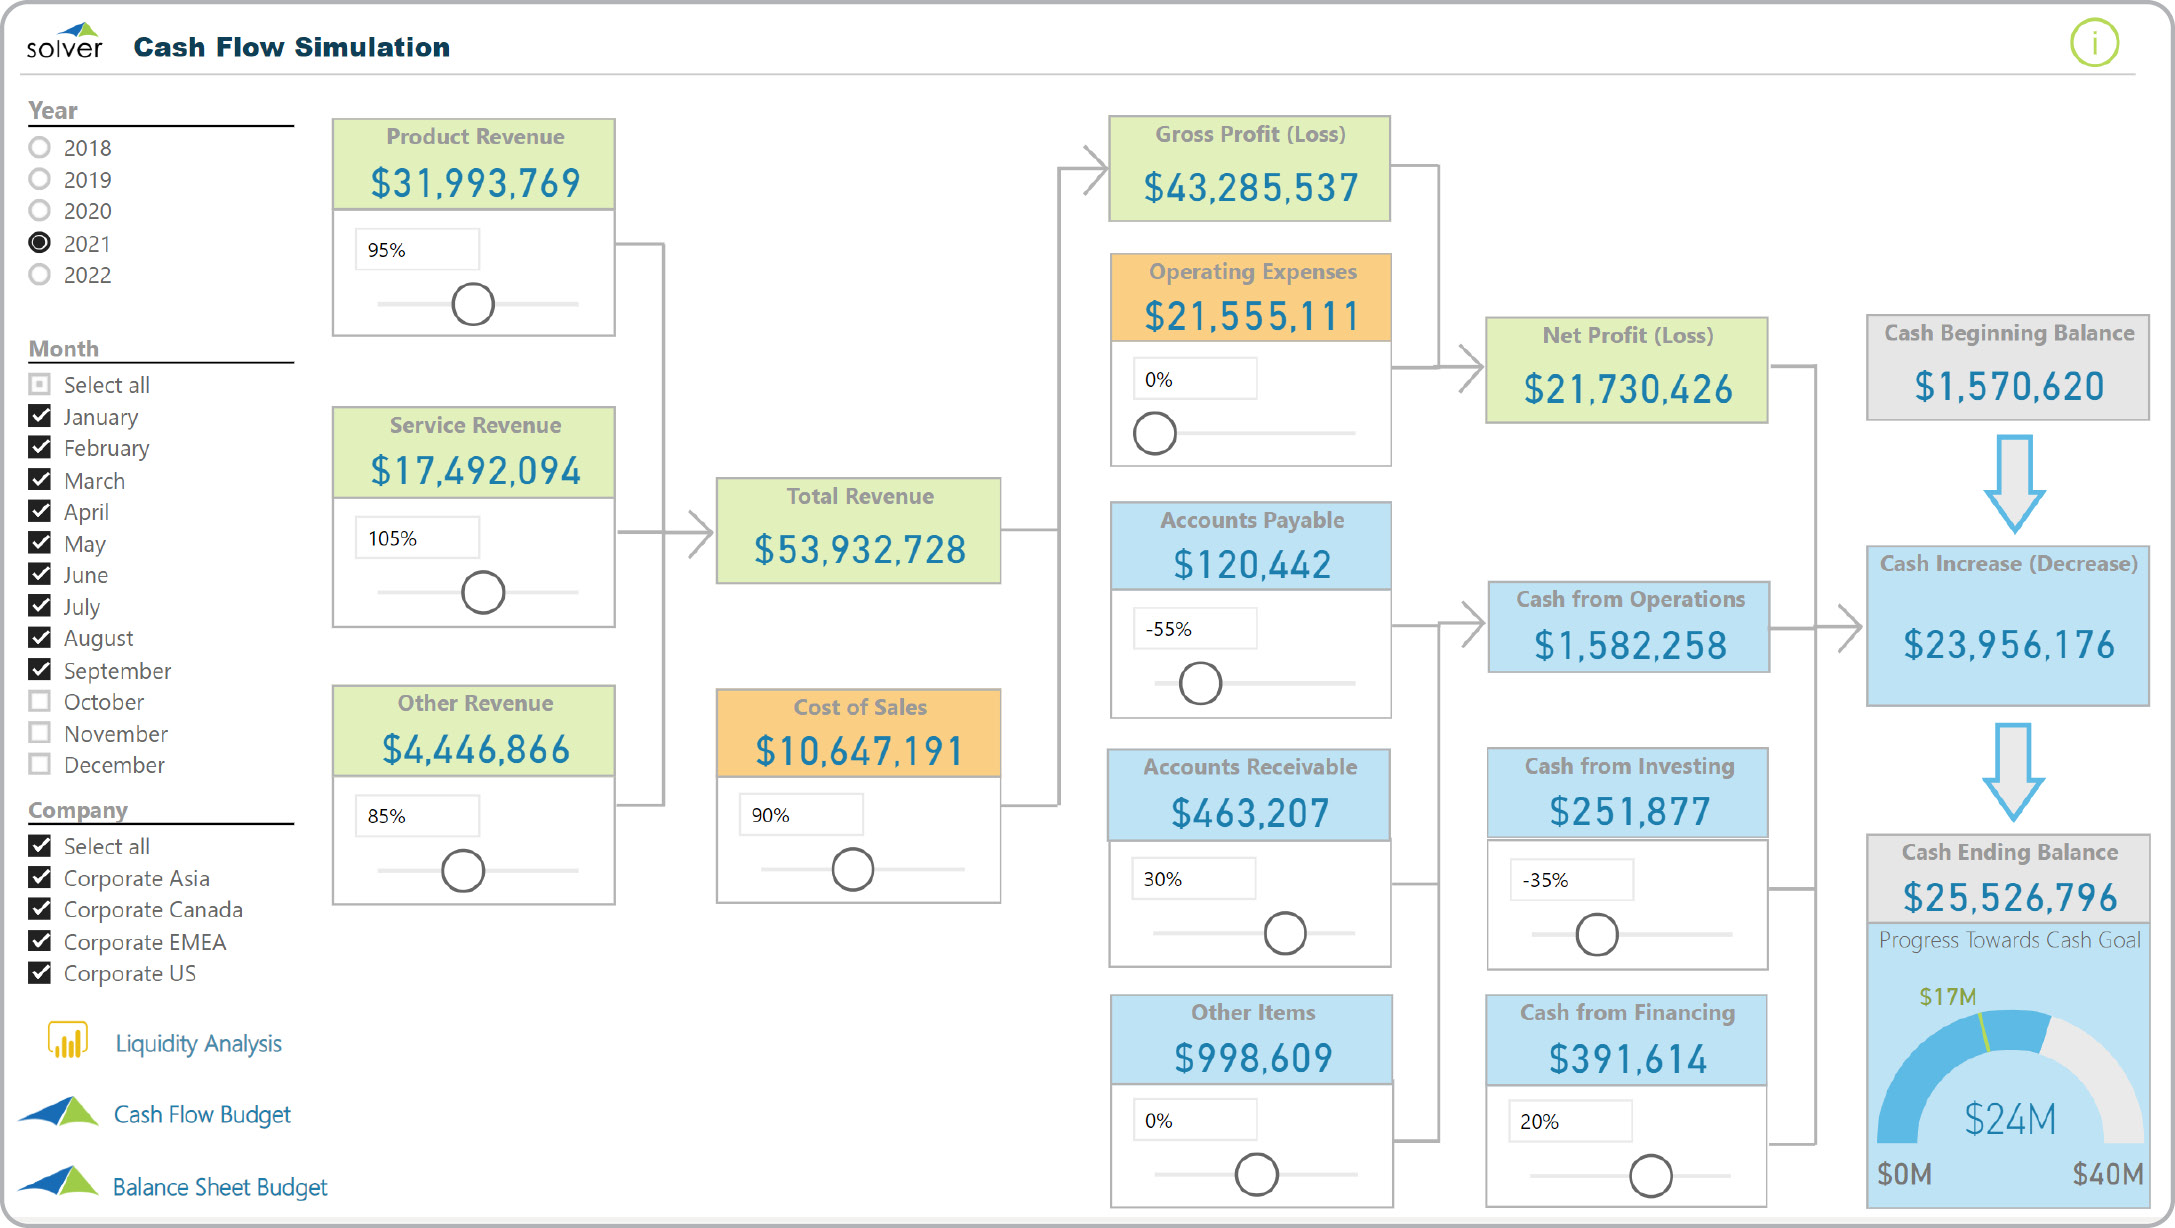 Simulation of cash flow with sliders where the user can increase/decrease any component.